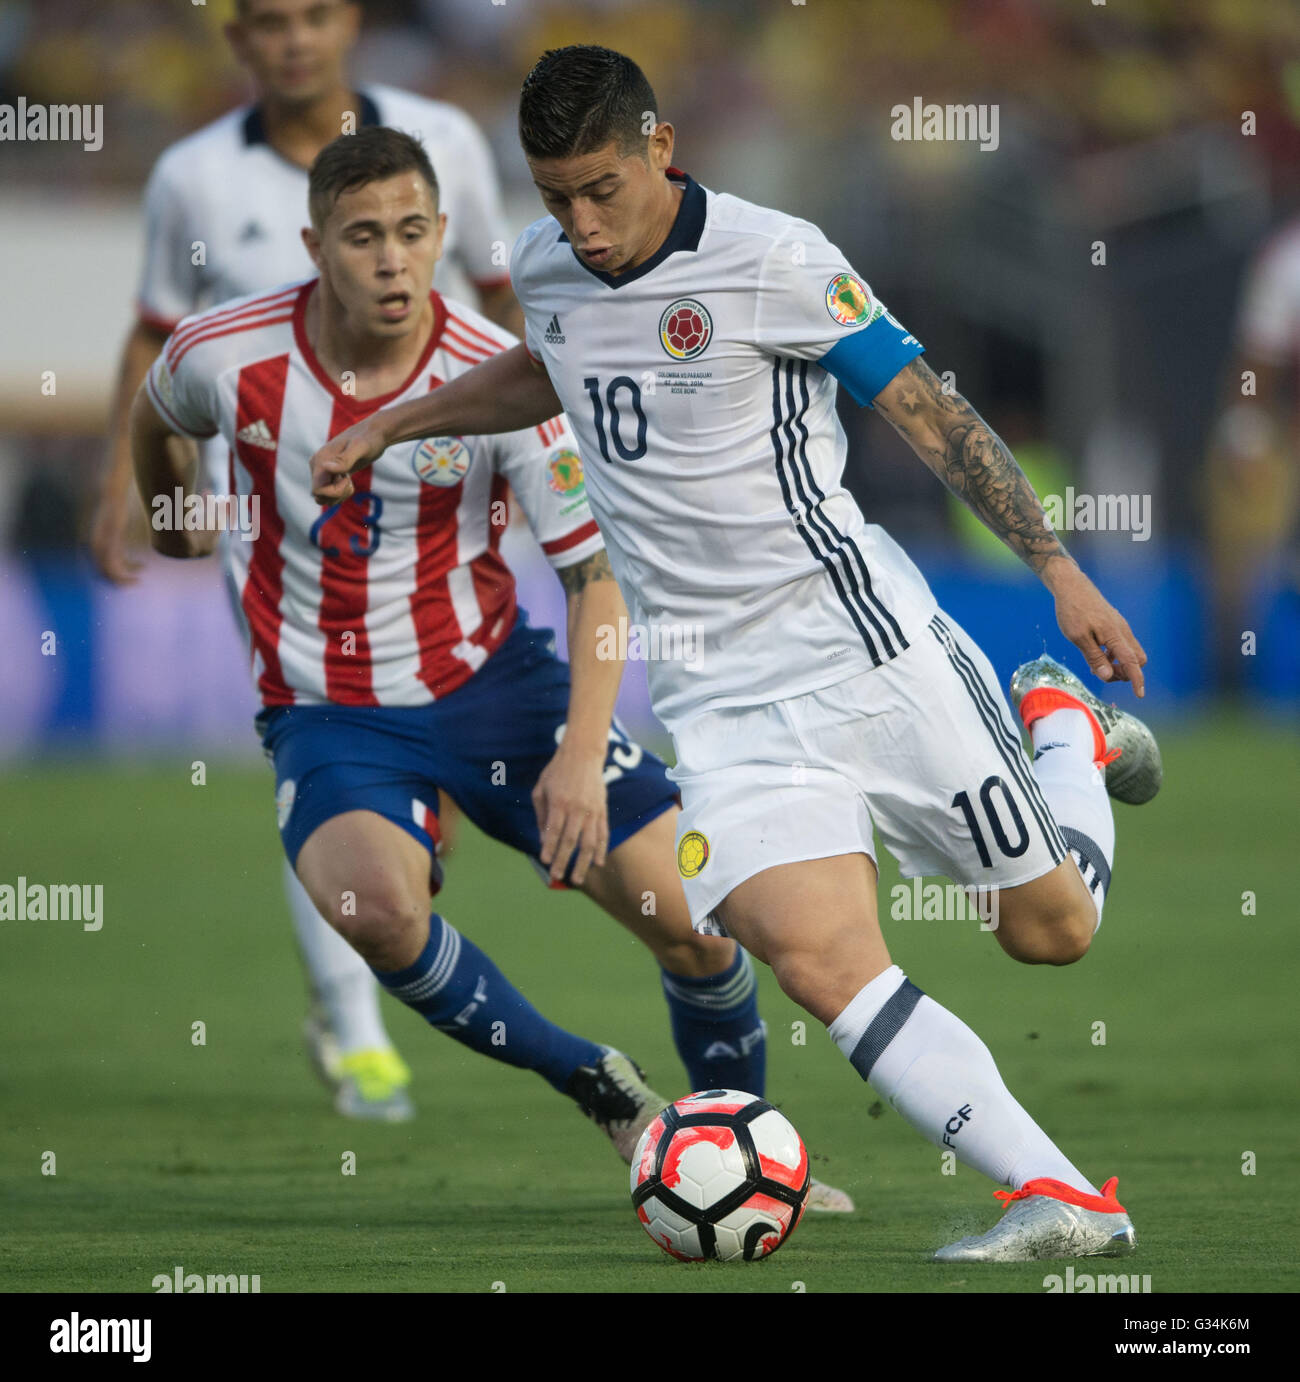 Pasadena, USA. 7th June, 2016. Colombia's James Rodriguez (R) controls the ball during the Copa America Centenario Group A match between Colombia and Paraguay at Rose Bowl Stadium in Pasadena, California, the United States, June 7, 2016. © Yang Lei/Xinhua/Alamy Live News Stock Photo